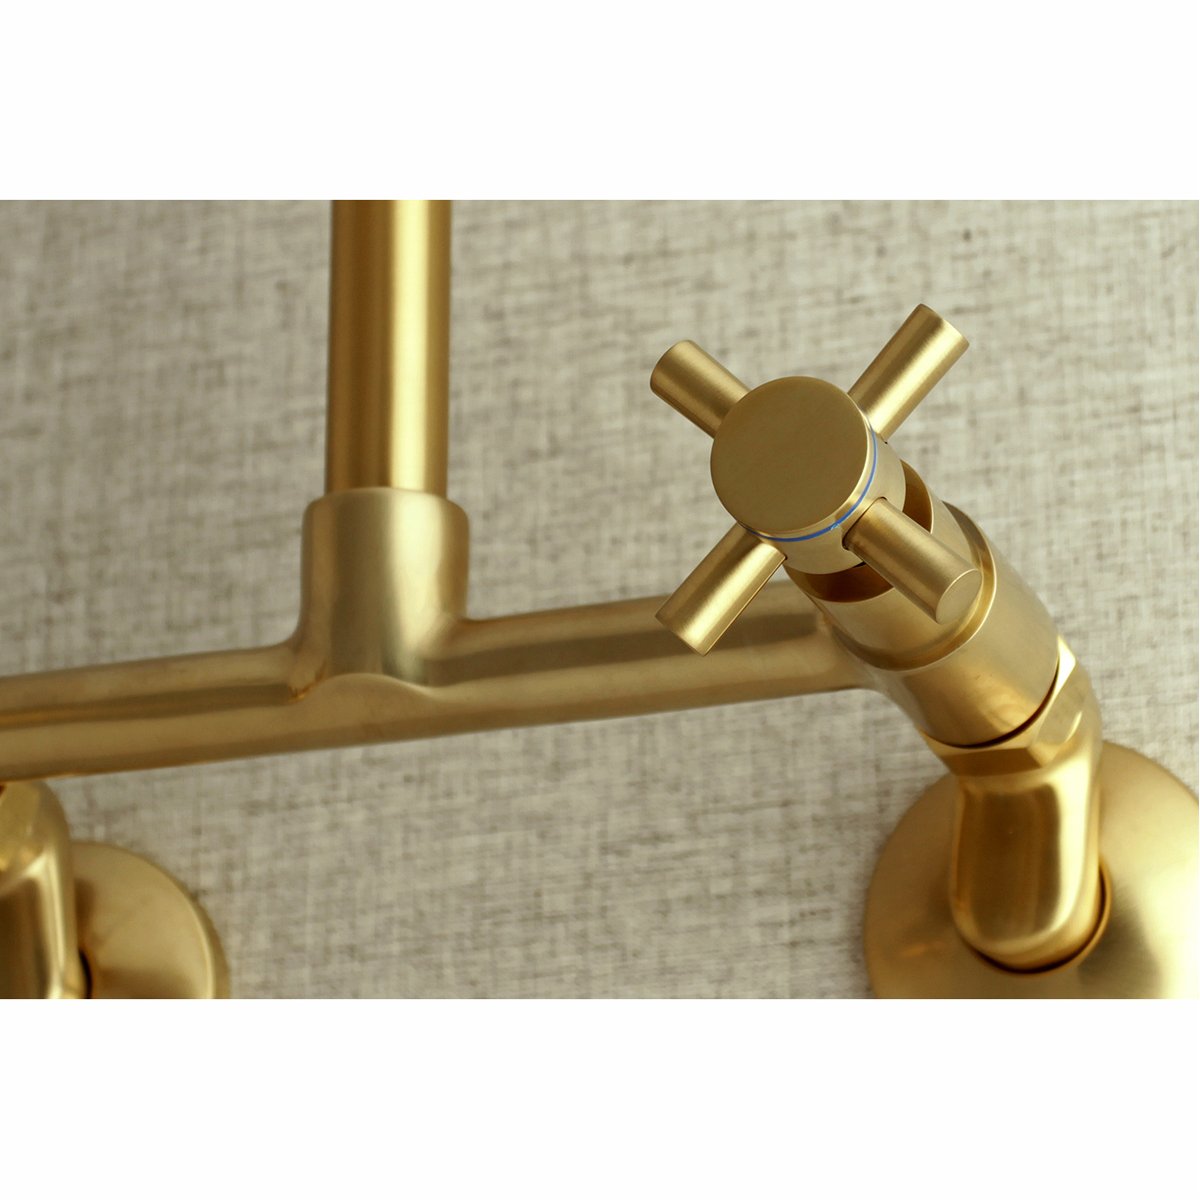 Kingston Brass Concord 8-Inch Adjustable Center Wall Mount Kitchen Faucet